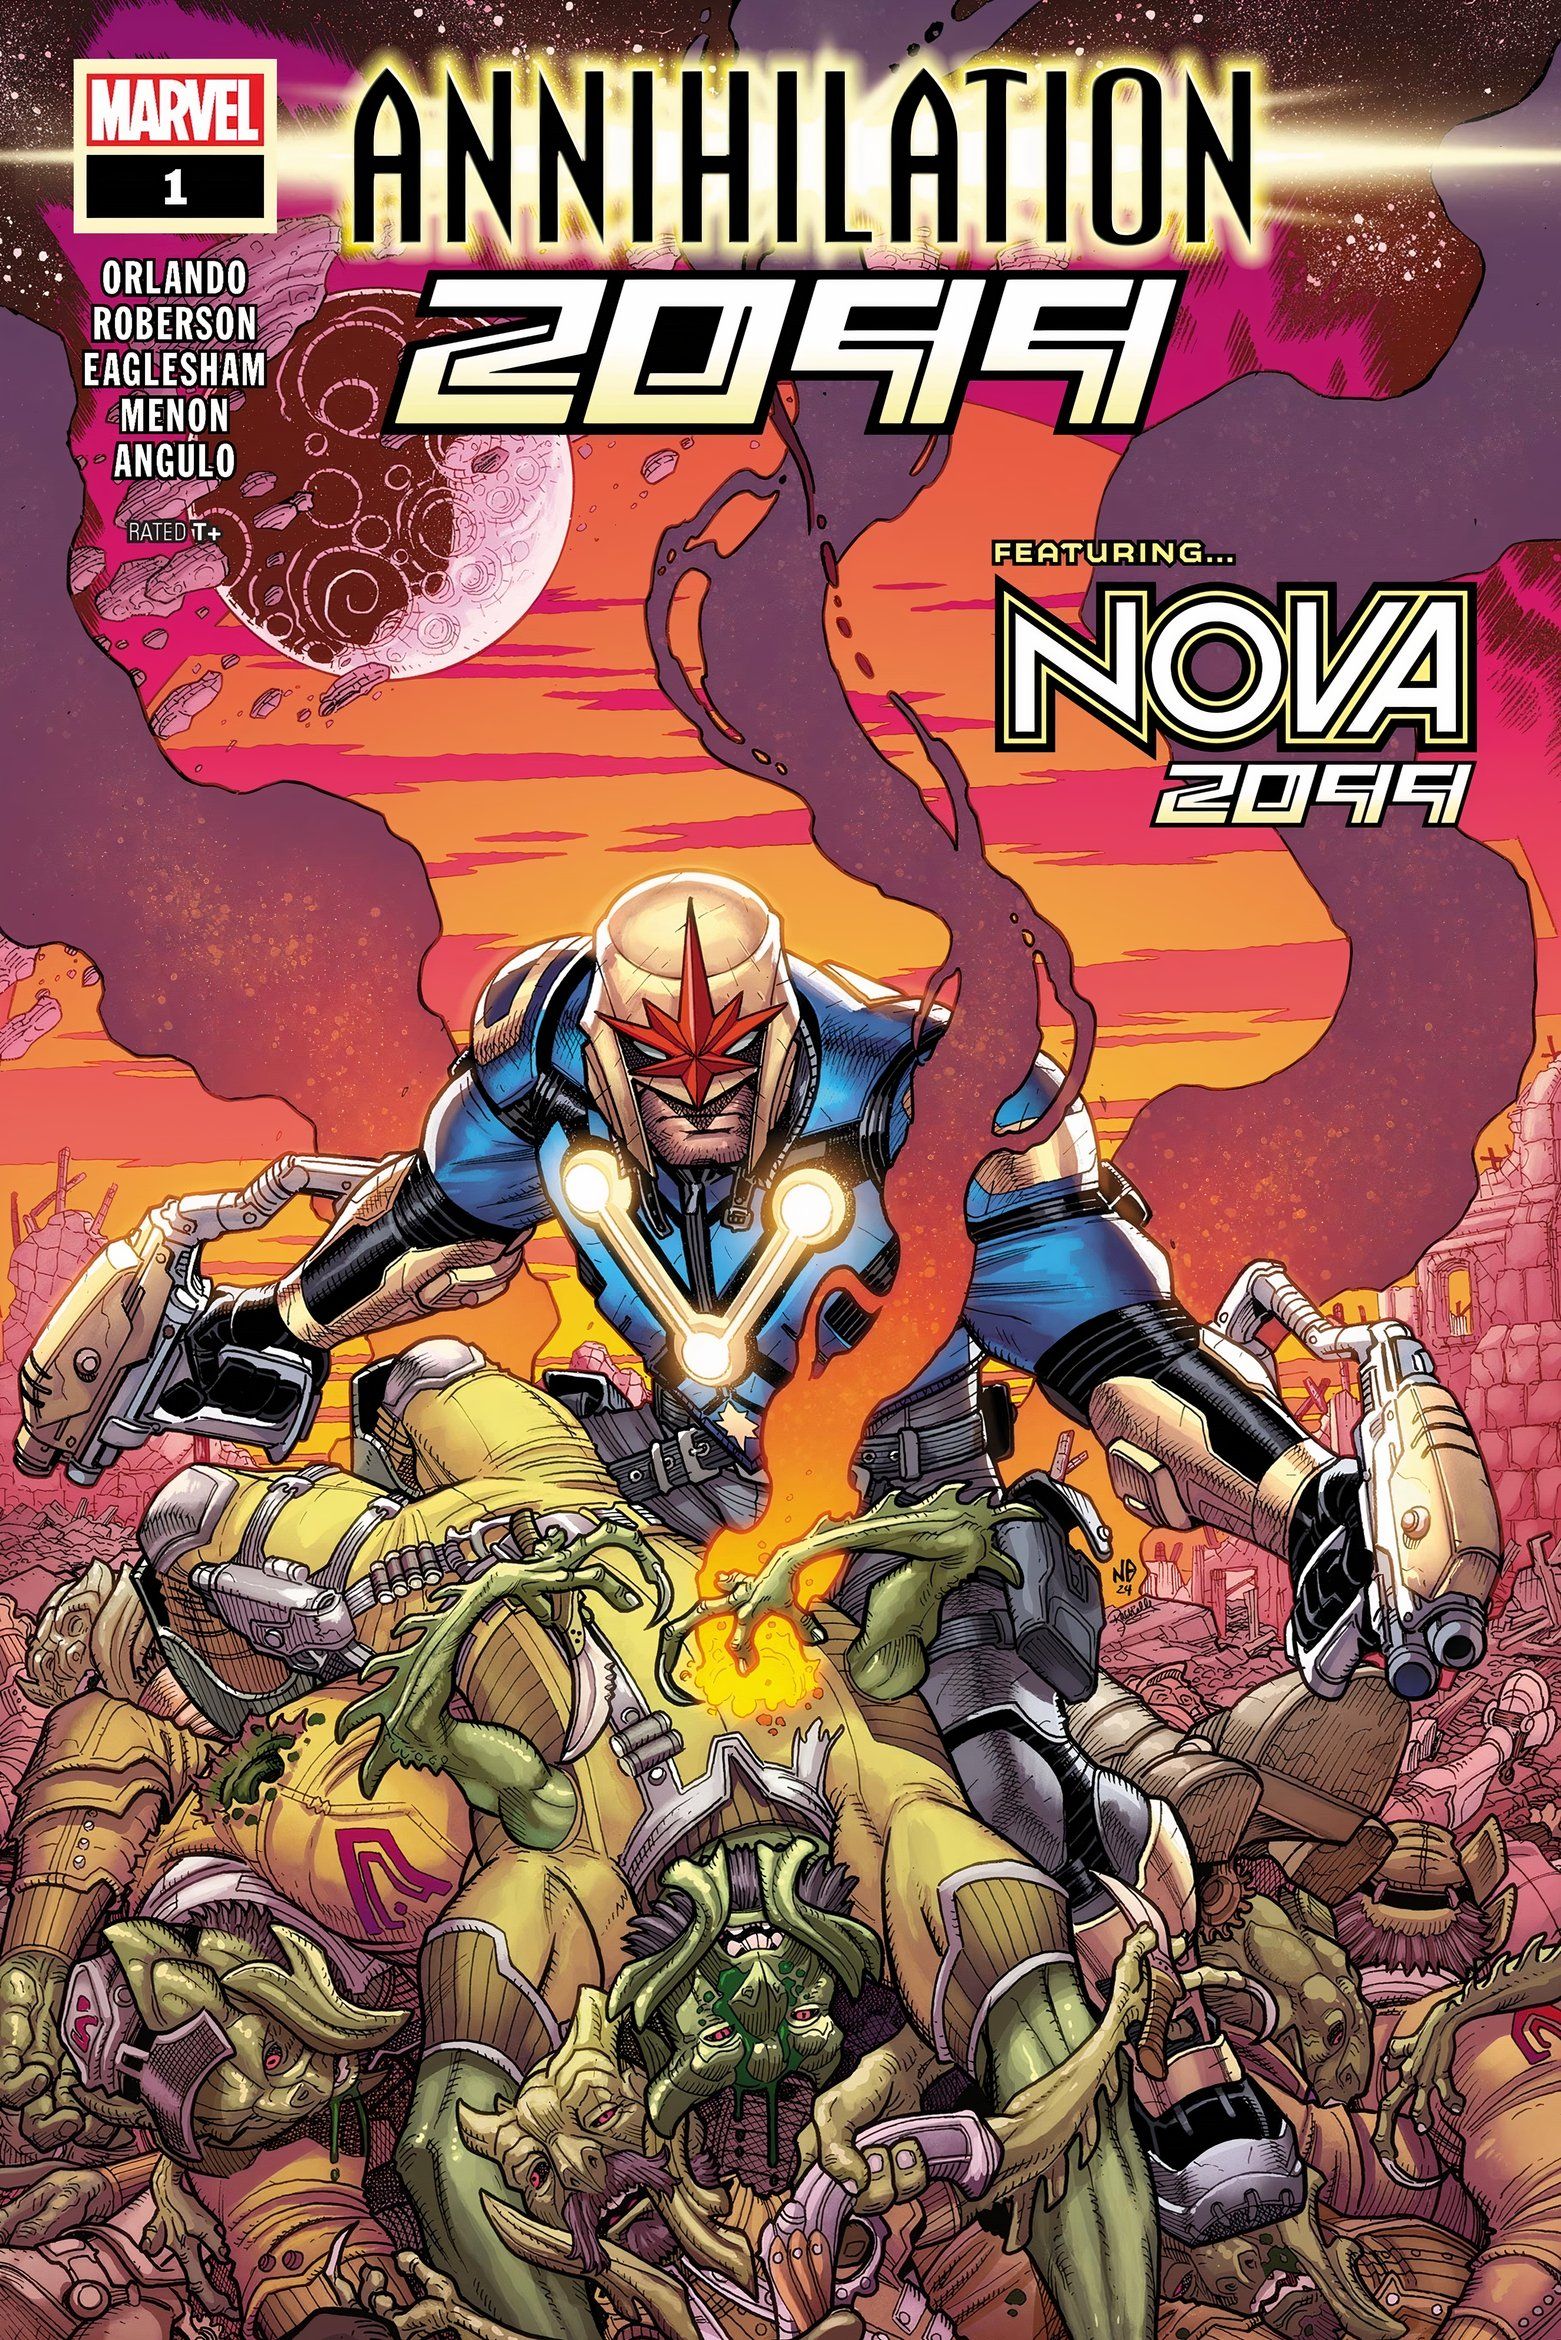 Annihilation 2099 #1 cover, featuring Nova standing over a defeated alien enemy.